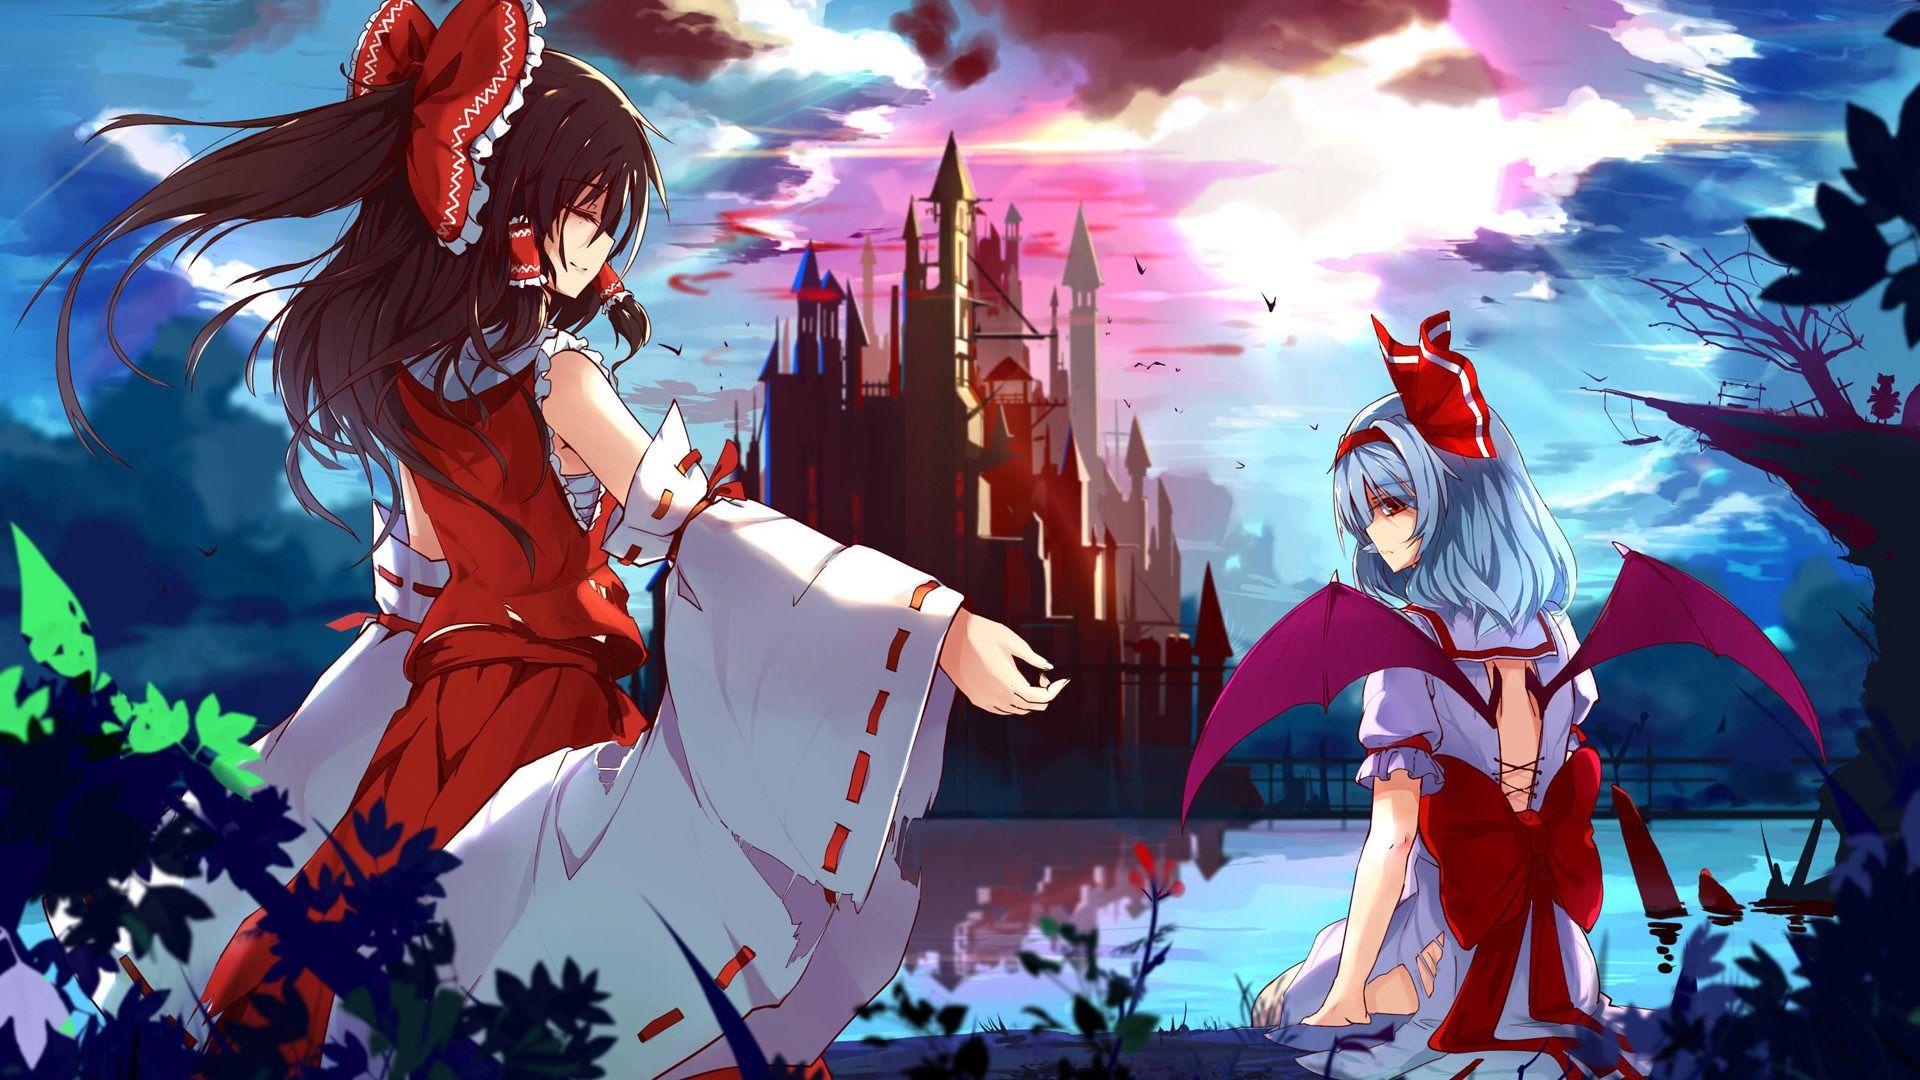 Touhou project wallpapers hd